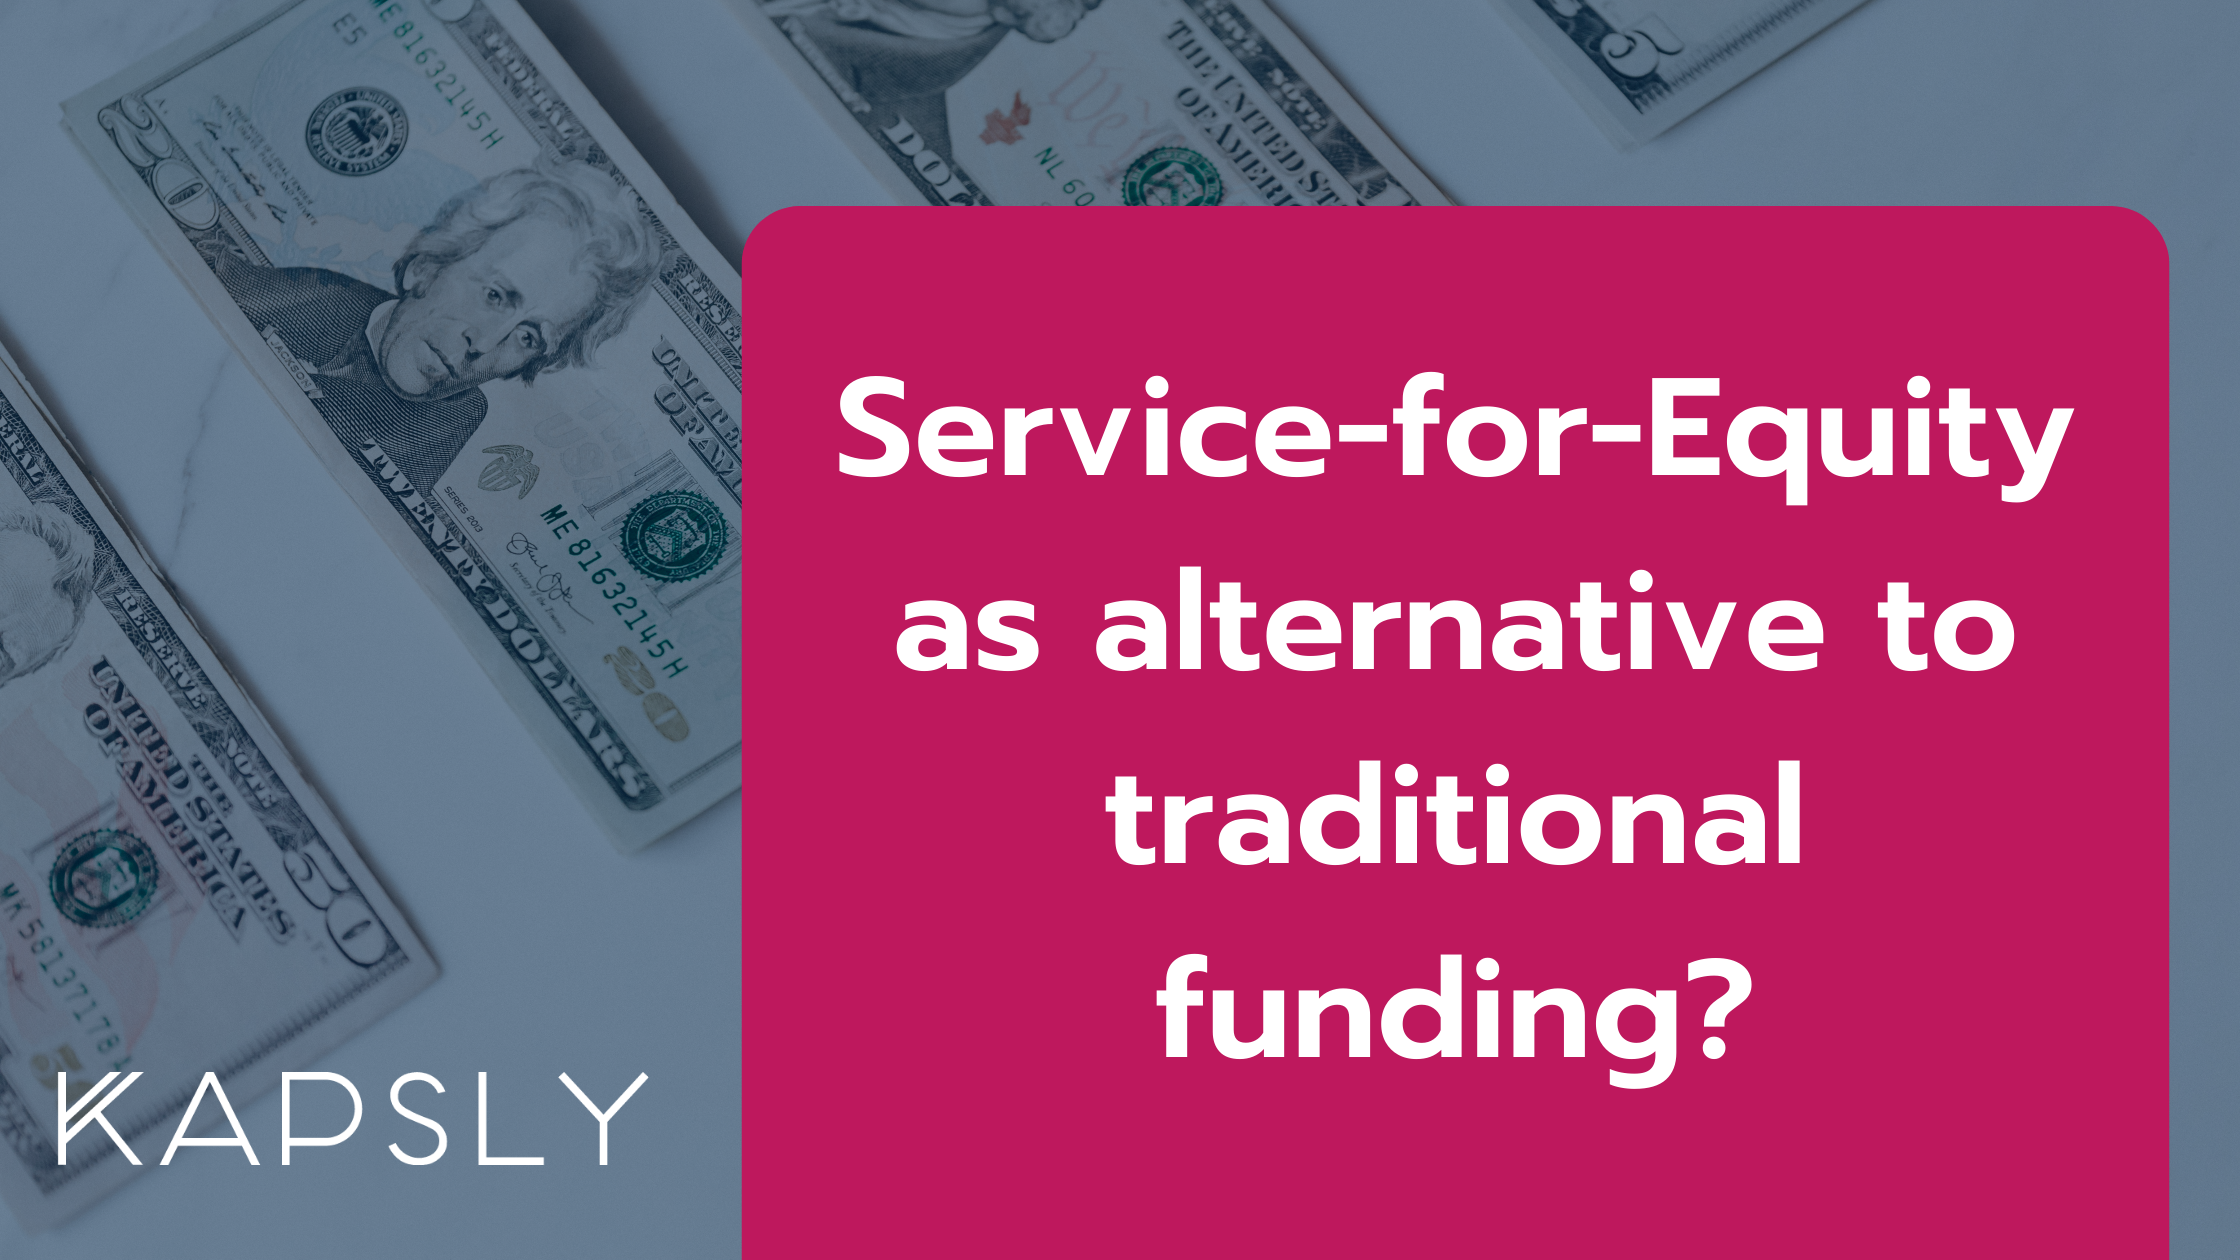 Service for equity as alternative for traditional funding